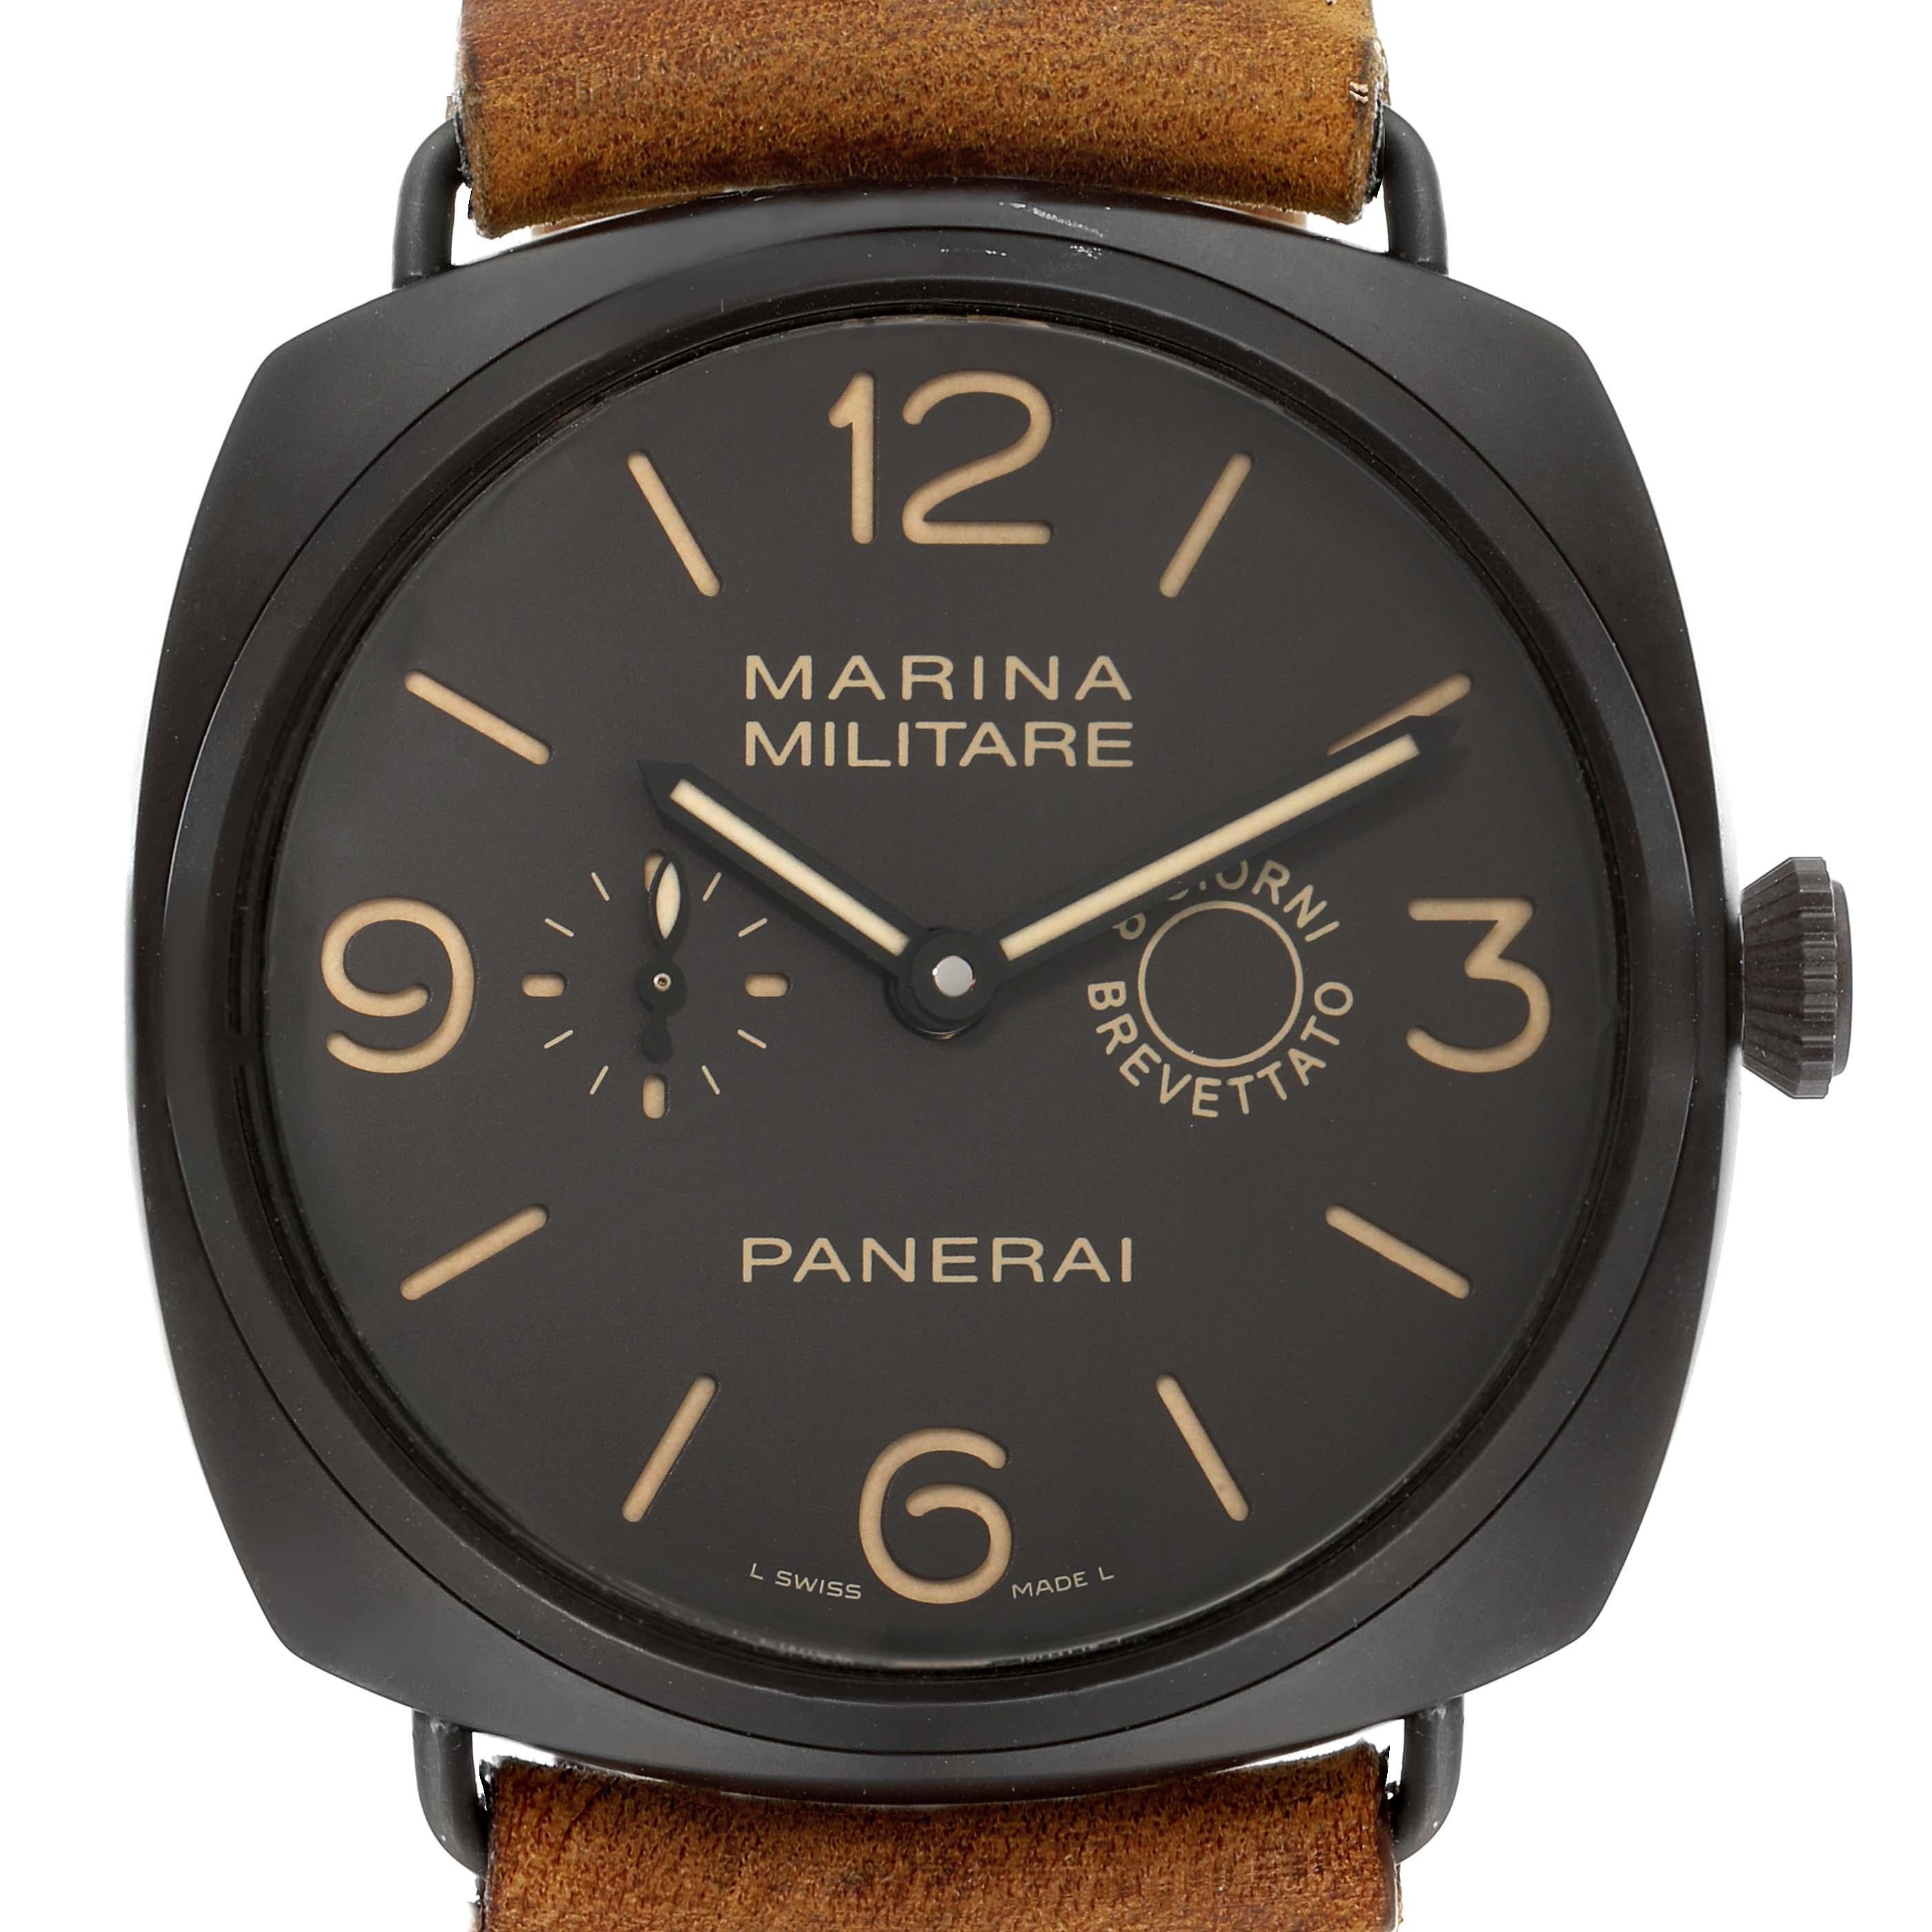 Panerai Radiomir Composite Marina Brown Dial Mens Watch PAM00339 Box Papers. Manual-winding movement. Cushion shaped composite case 47.0 mm in diameter. Black composite sloped bezel. Scratch resistant sapphire crystal. Millitary brown dial with